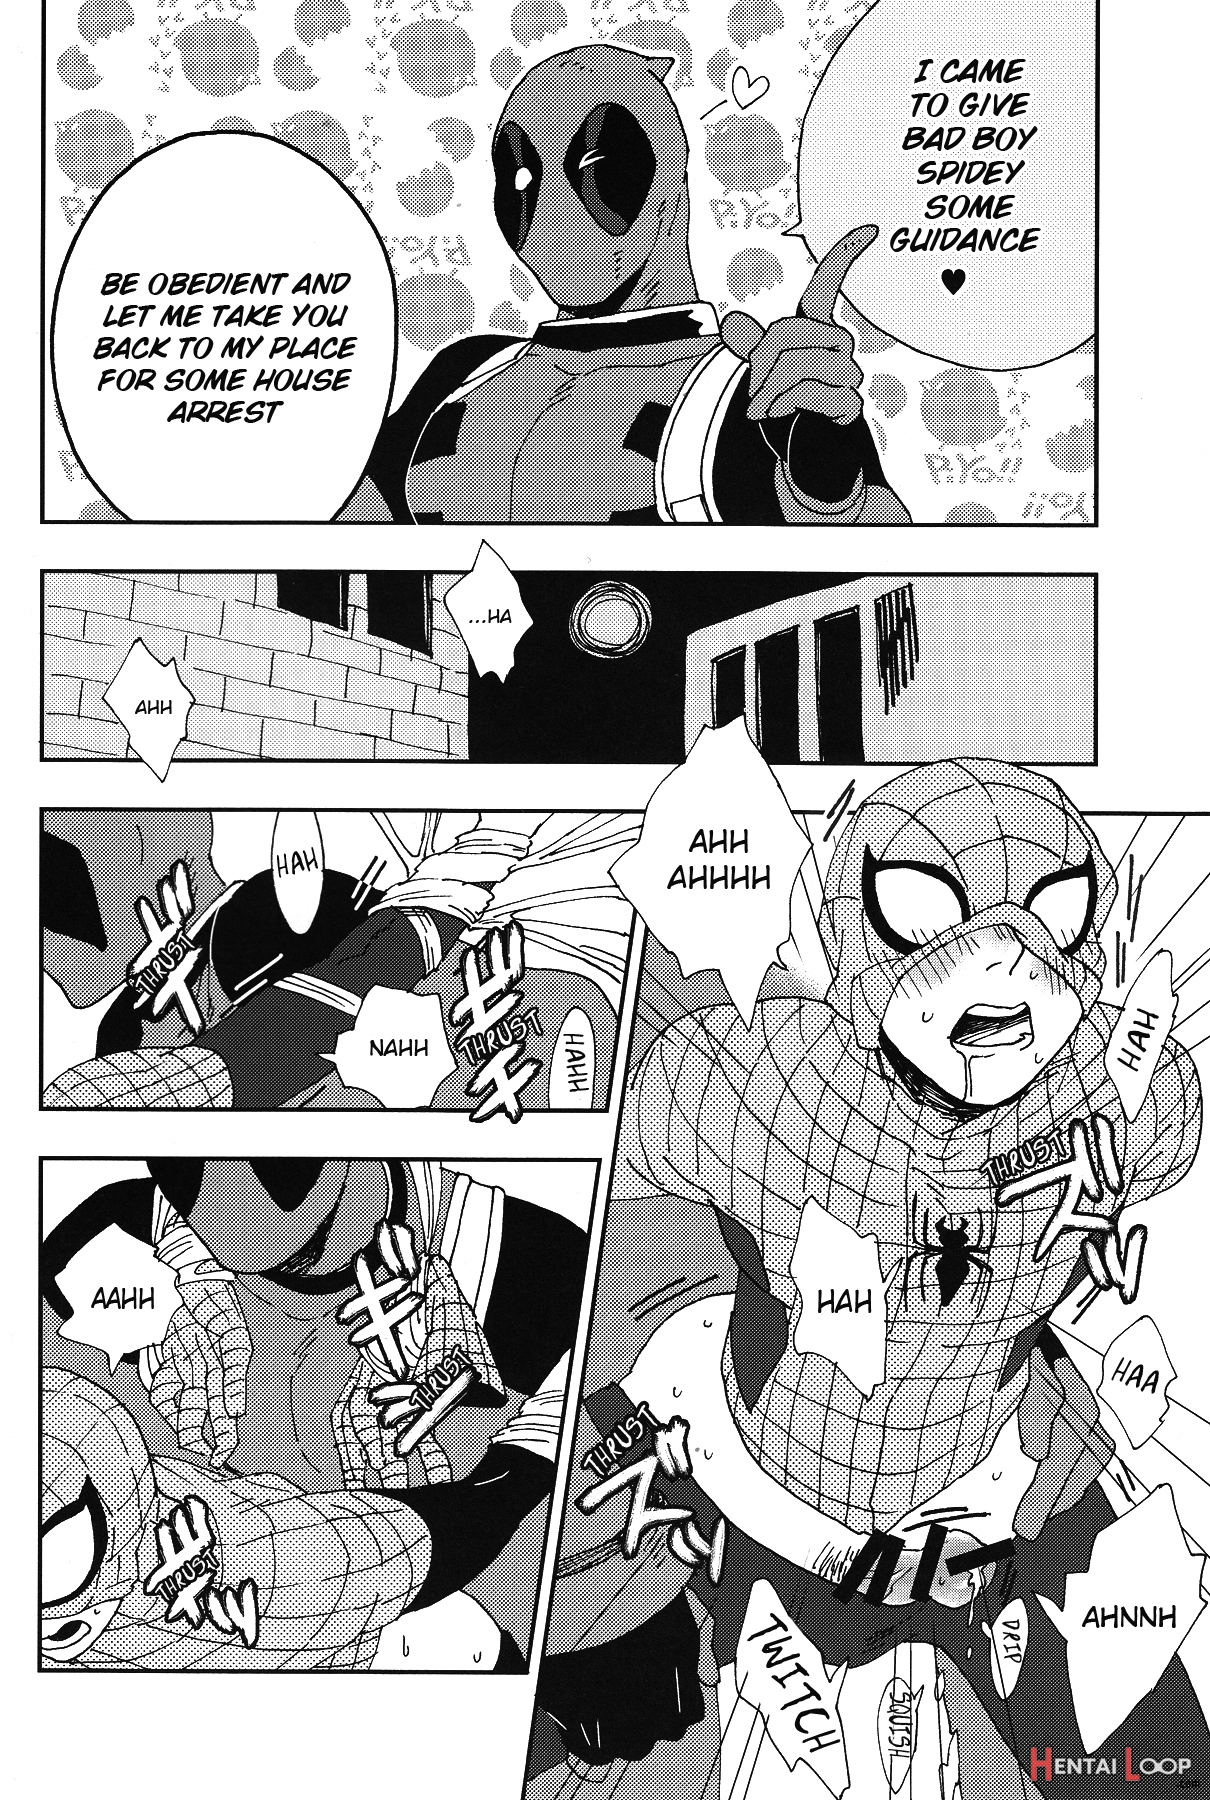 Naughty Spidey page 7